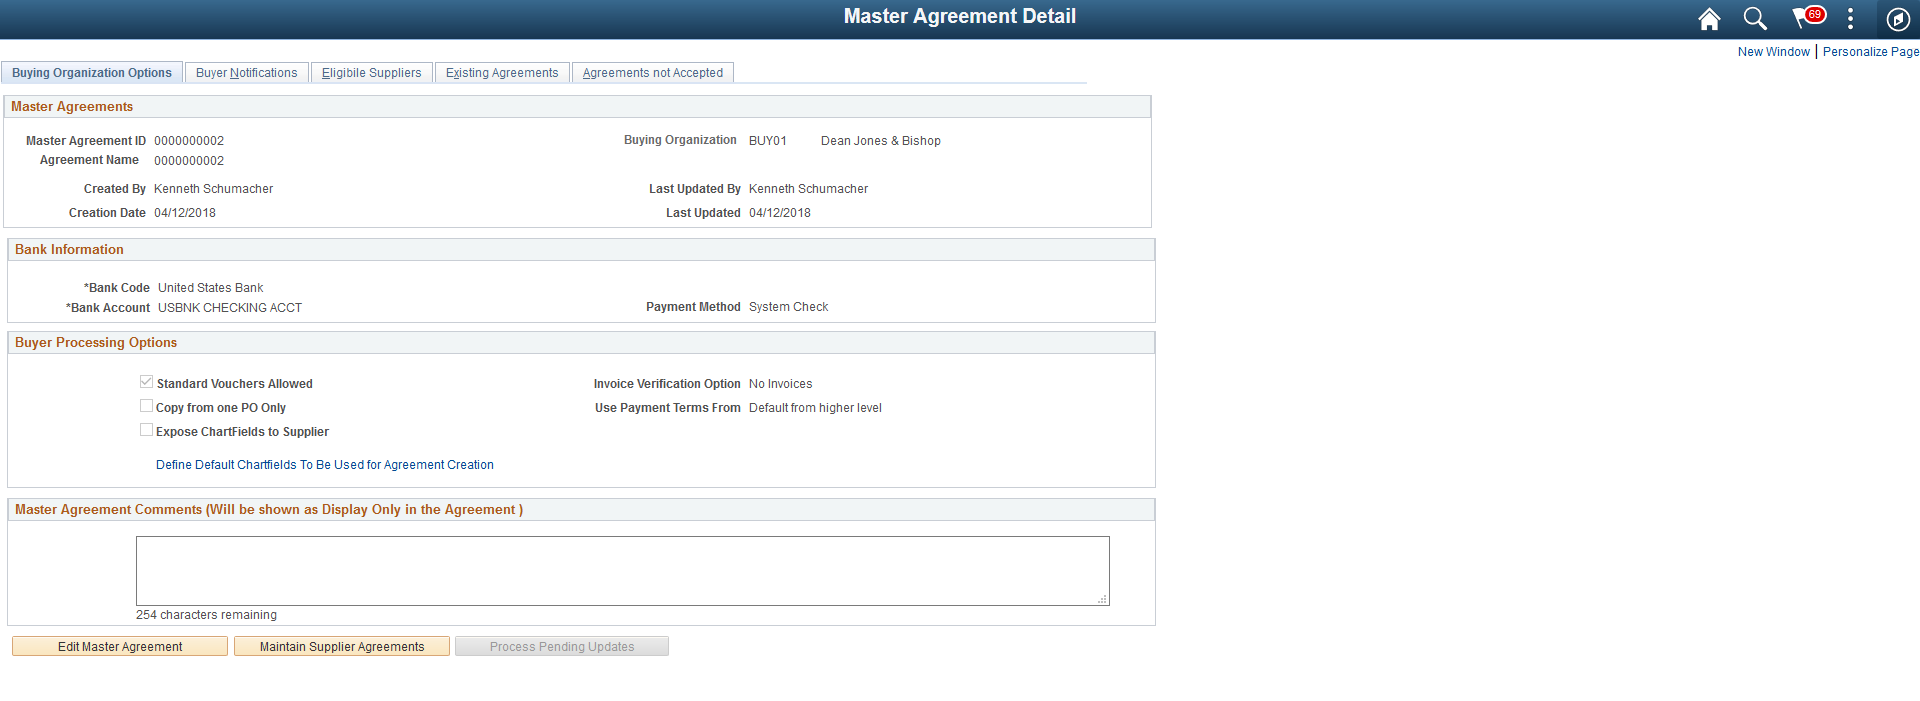 Master Agreements Detail - Buying Organization OptionPages